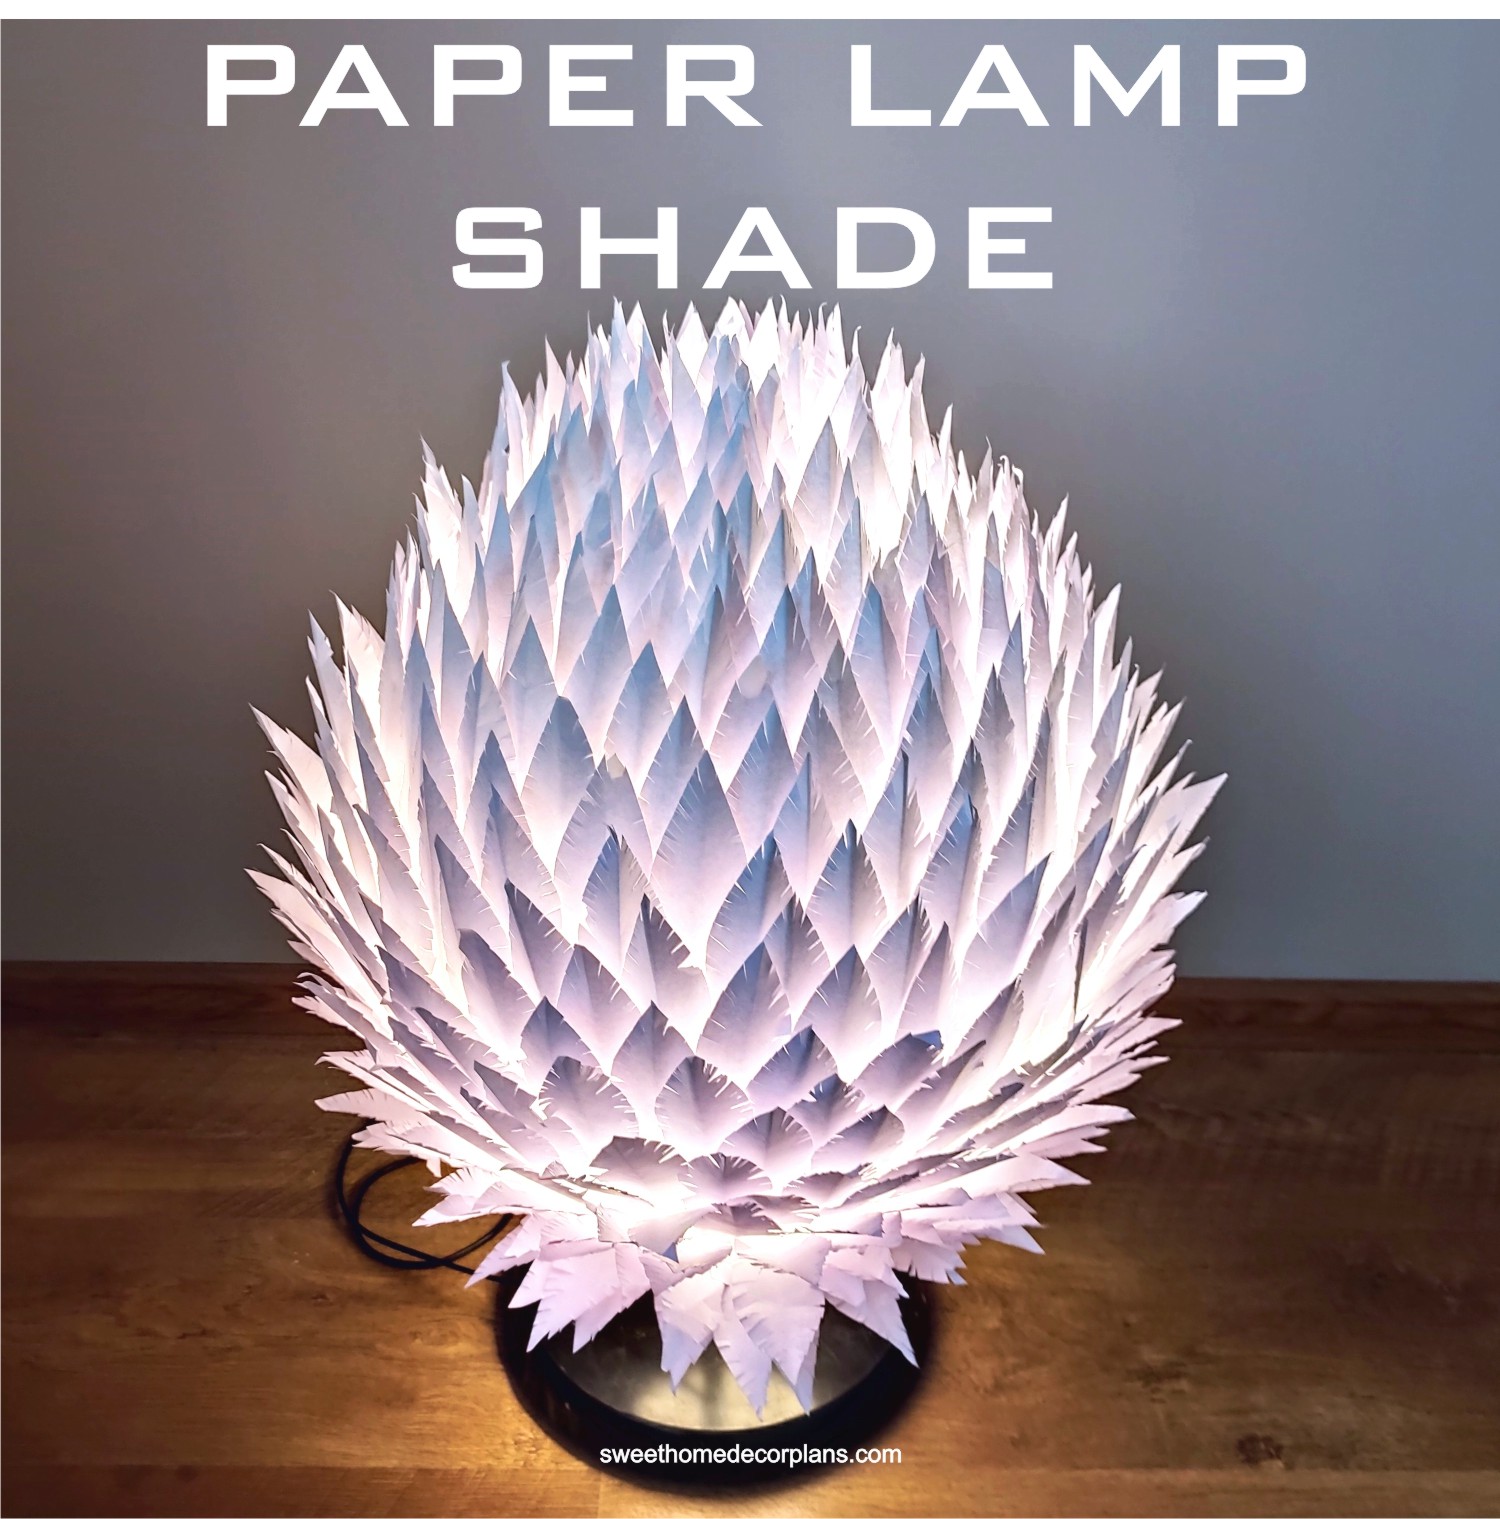 Diy-lampshade-paper-lamp-in-pdf-for-wedding-and-home-decor